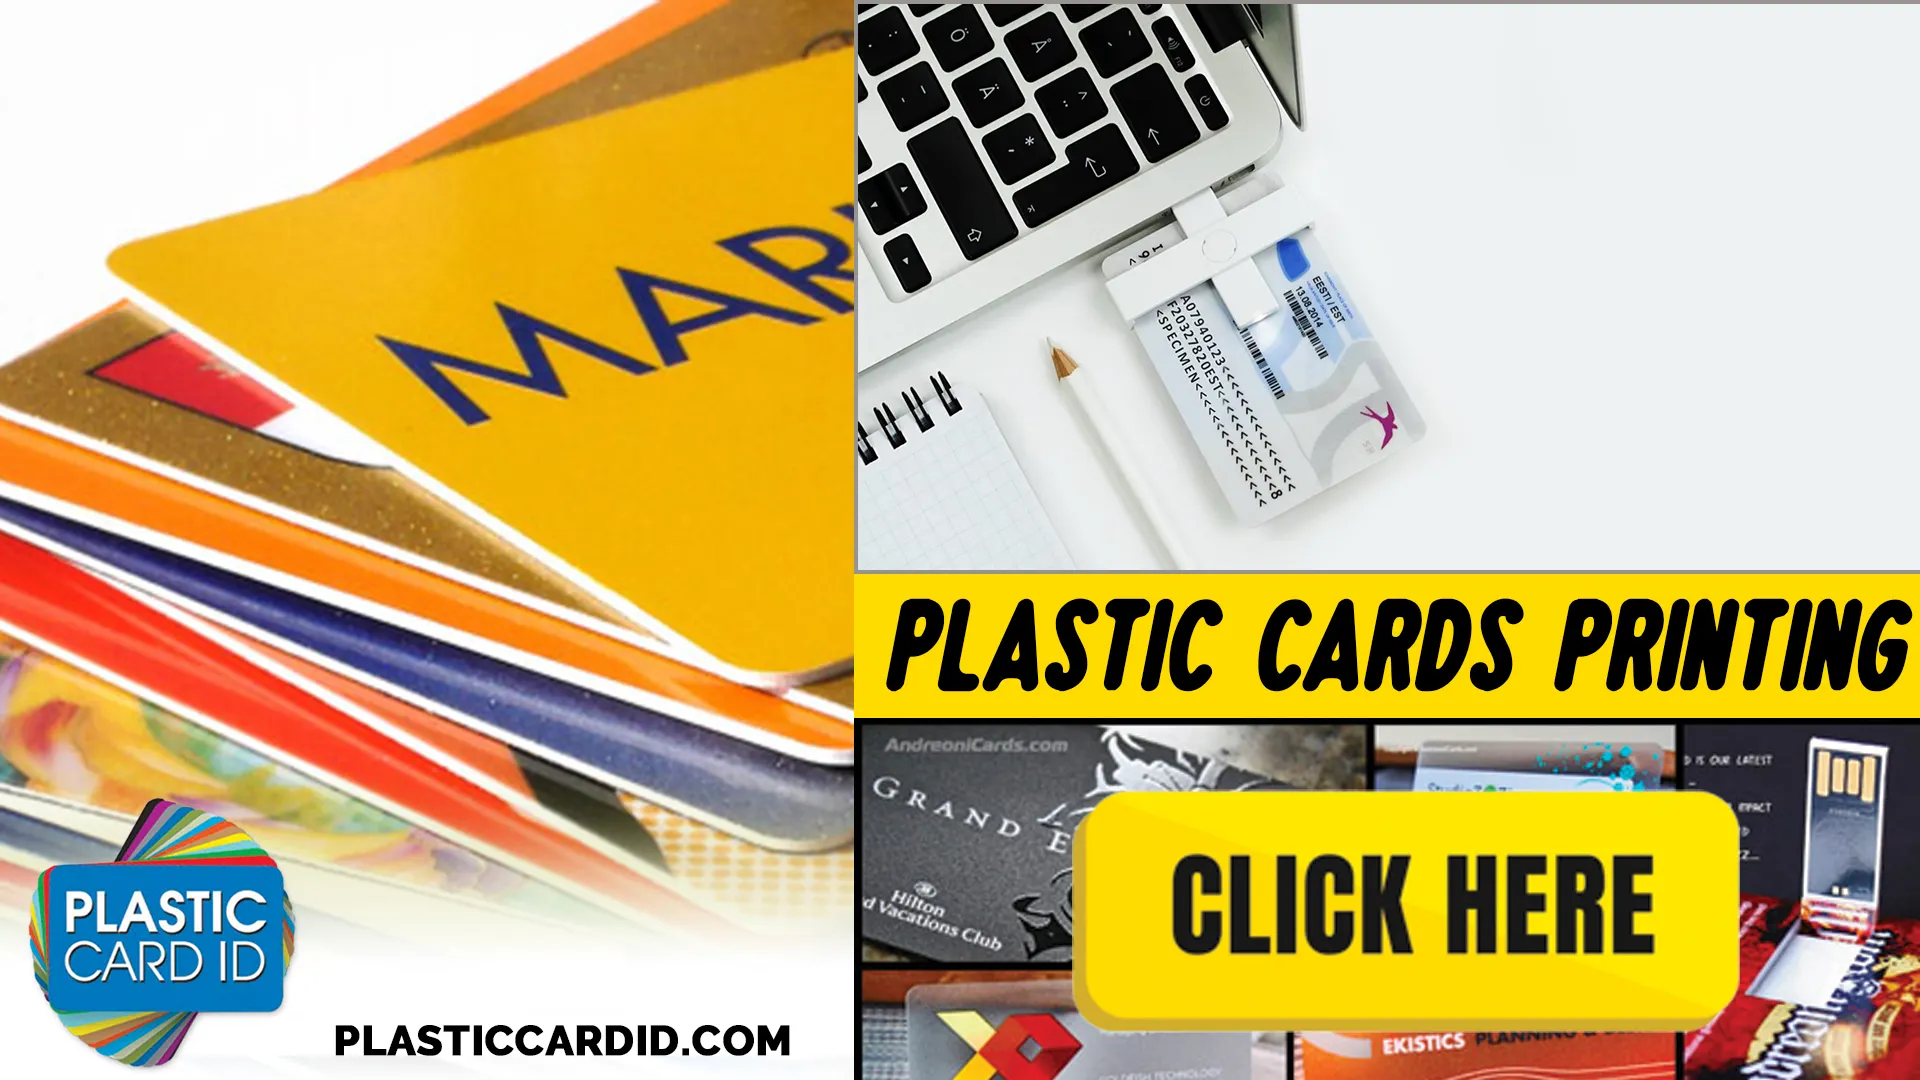 Experience Next-Level Customization with Plastic Card ID
's Advanced Key Tag Printing